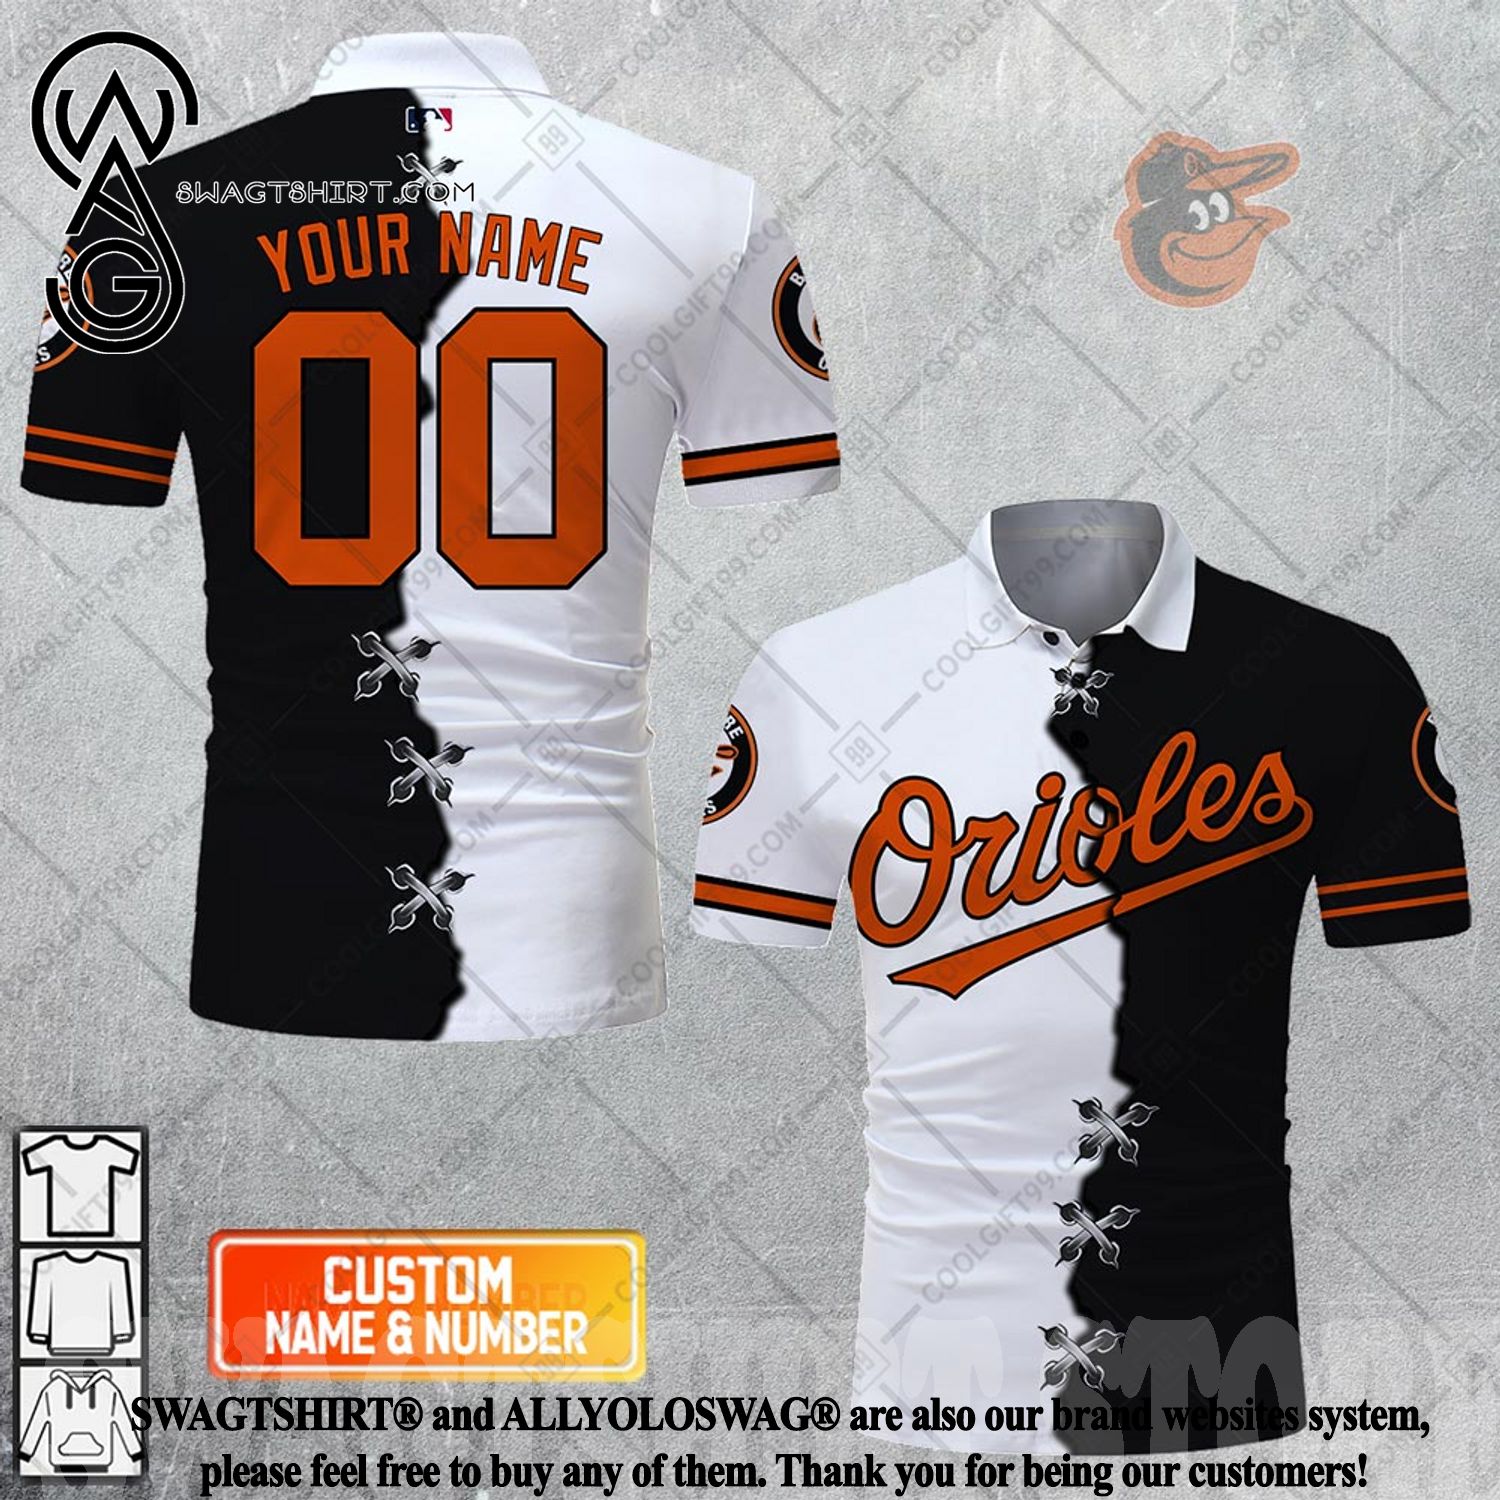 orioles button up jersey